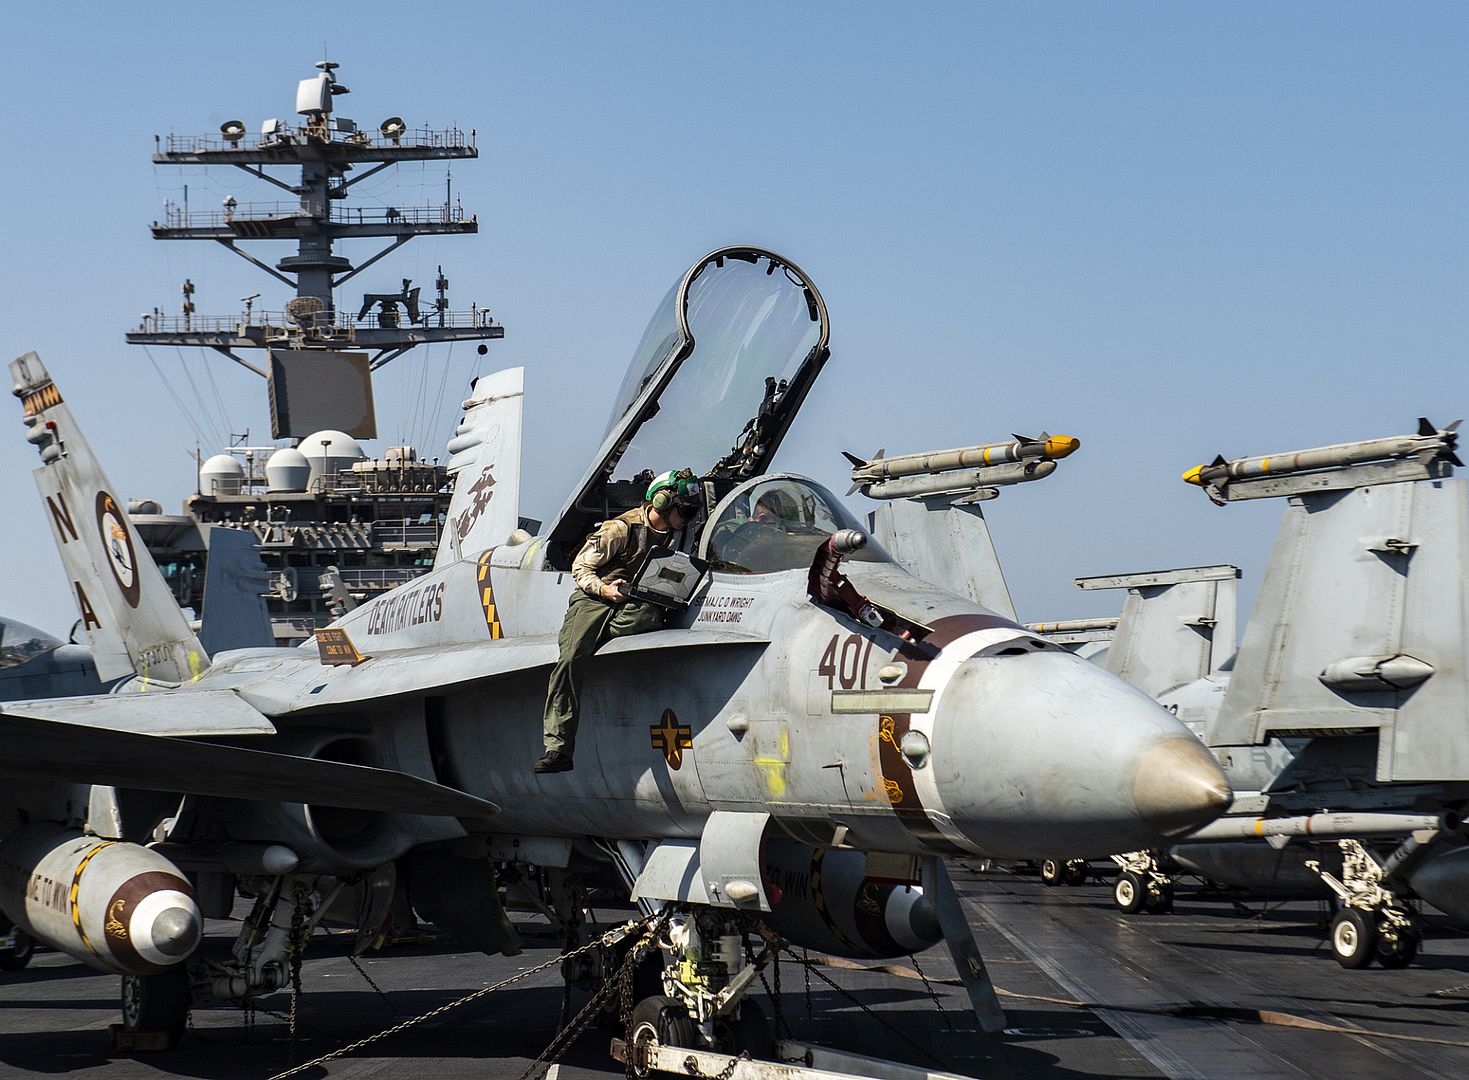 FA 18C Hornet From The Death Rattlers Of Marine Strike Fighter Squadron 22 On The Flight Deck Of The Aircraft Carrier USS Nimitz